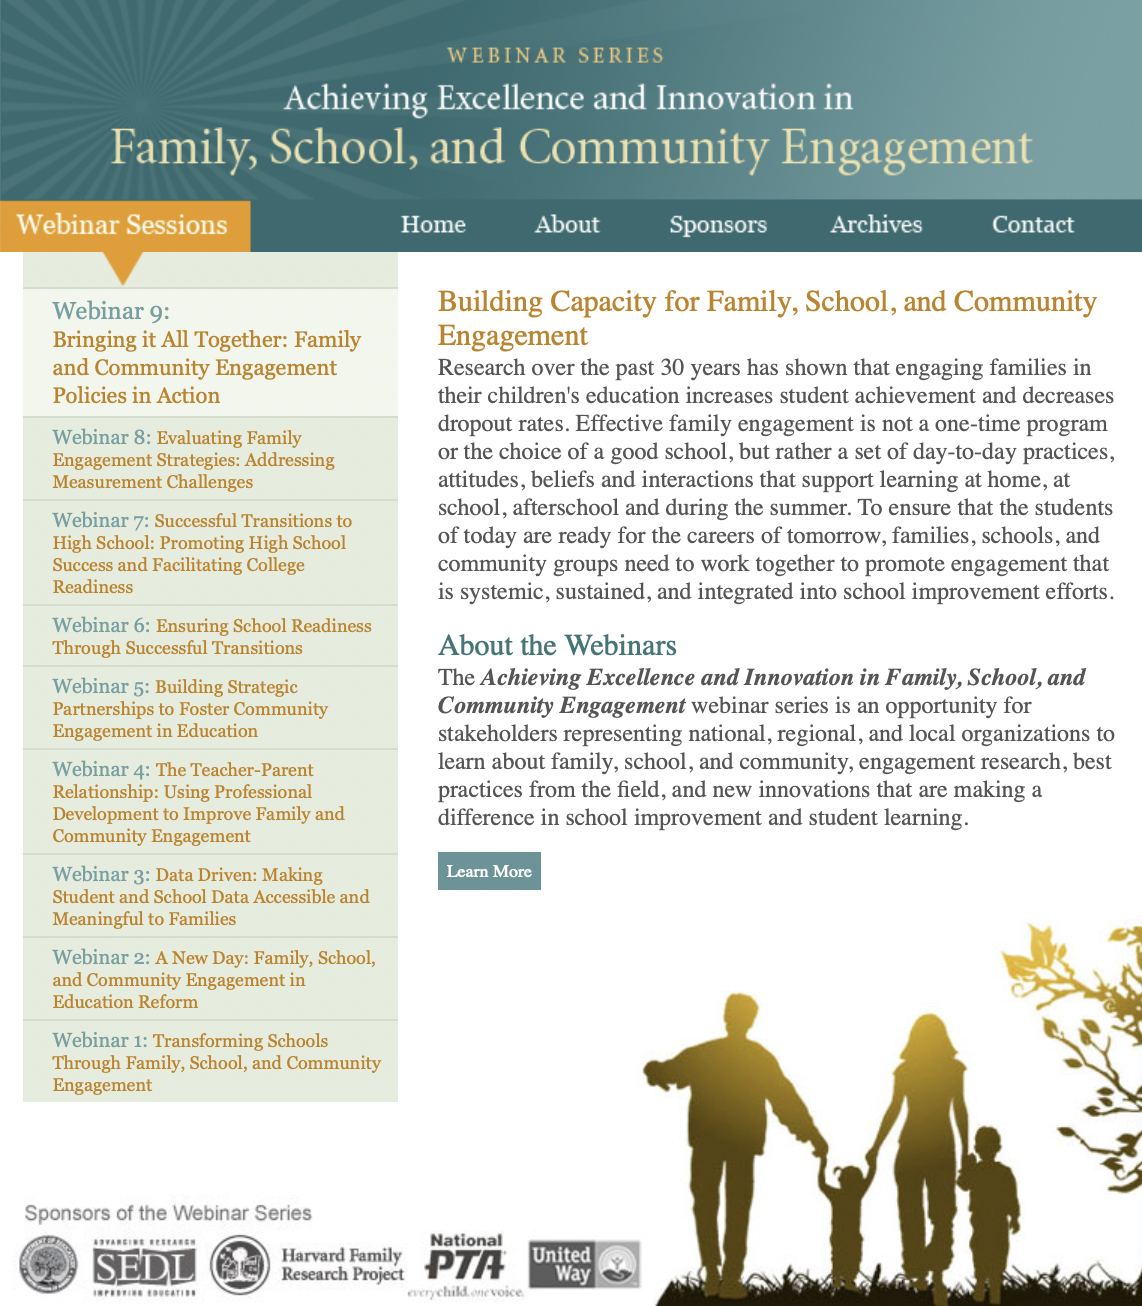 Building Capacity for Family, School and Community Engagement